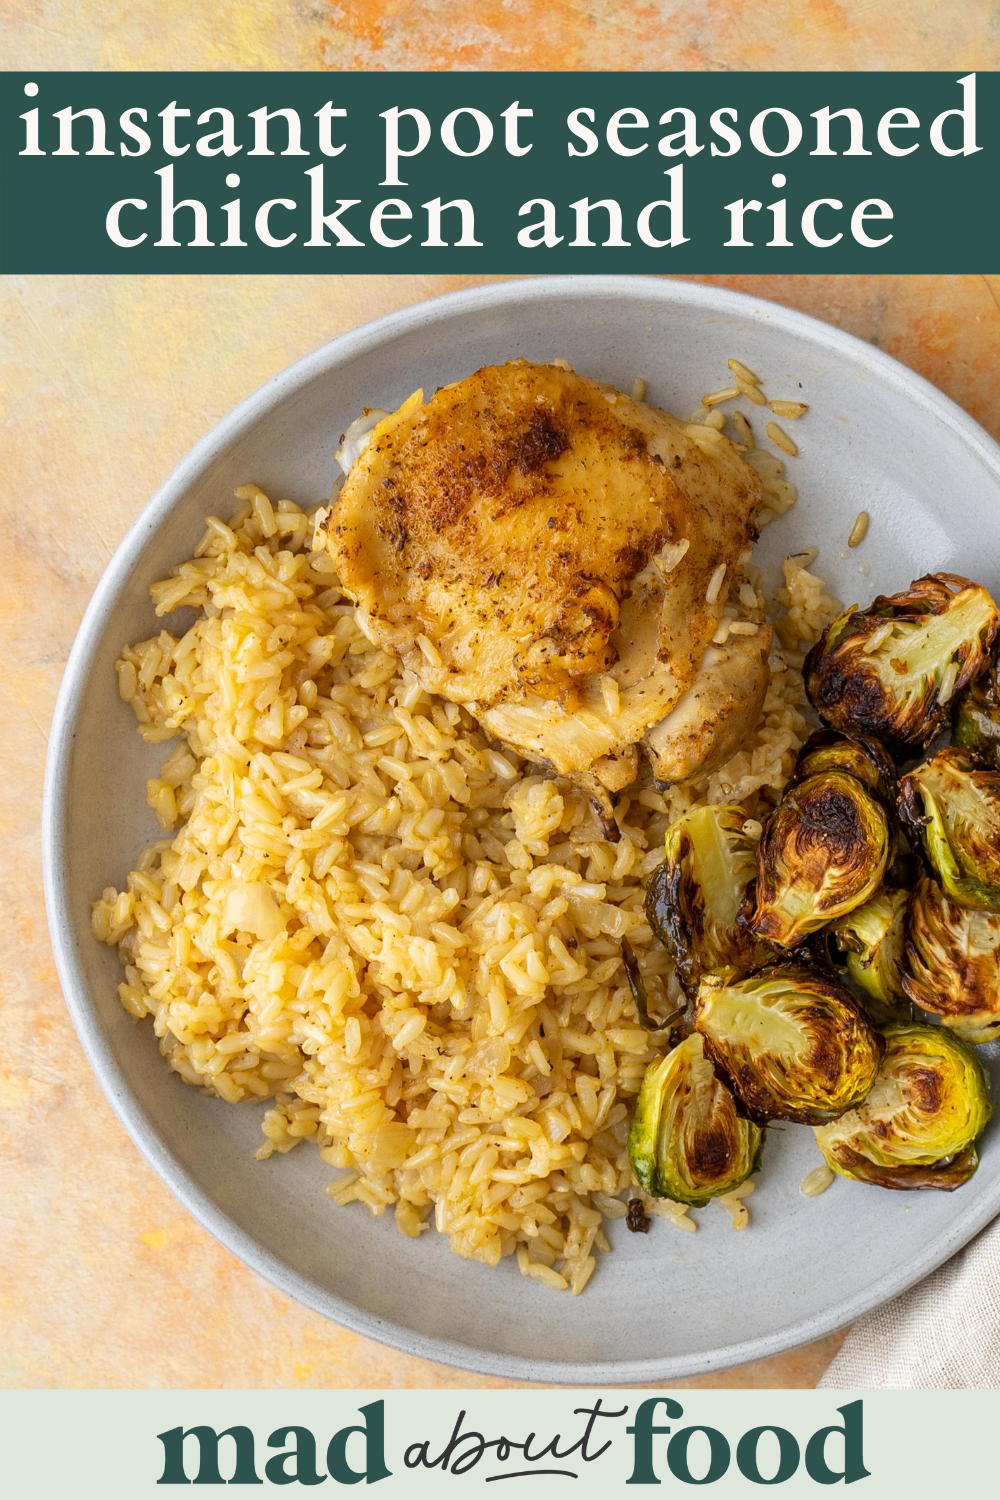 Image for pinning Instant Pot Seasoned Chicken and Rice recipe on Pinterest